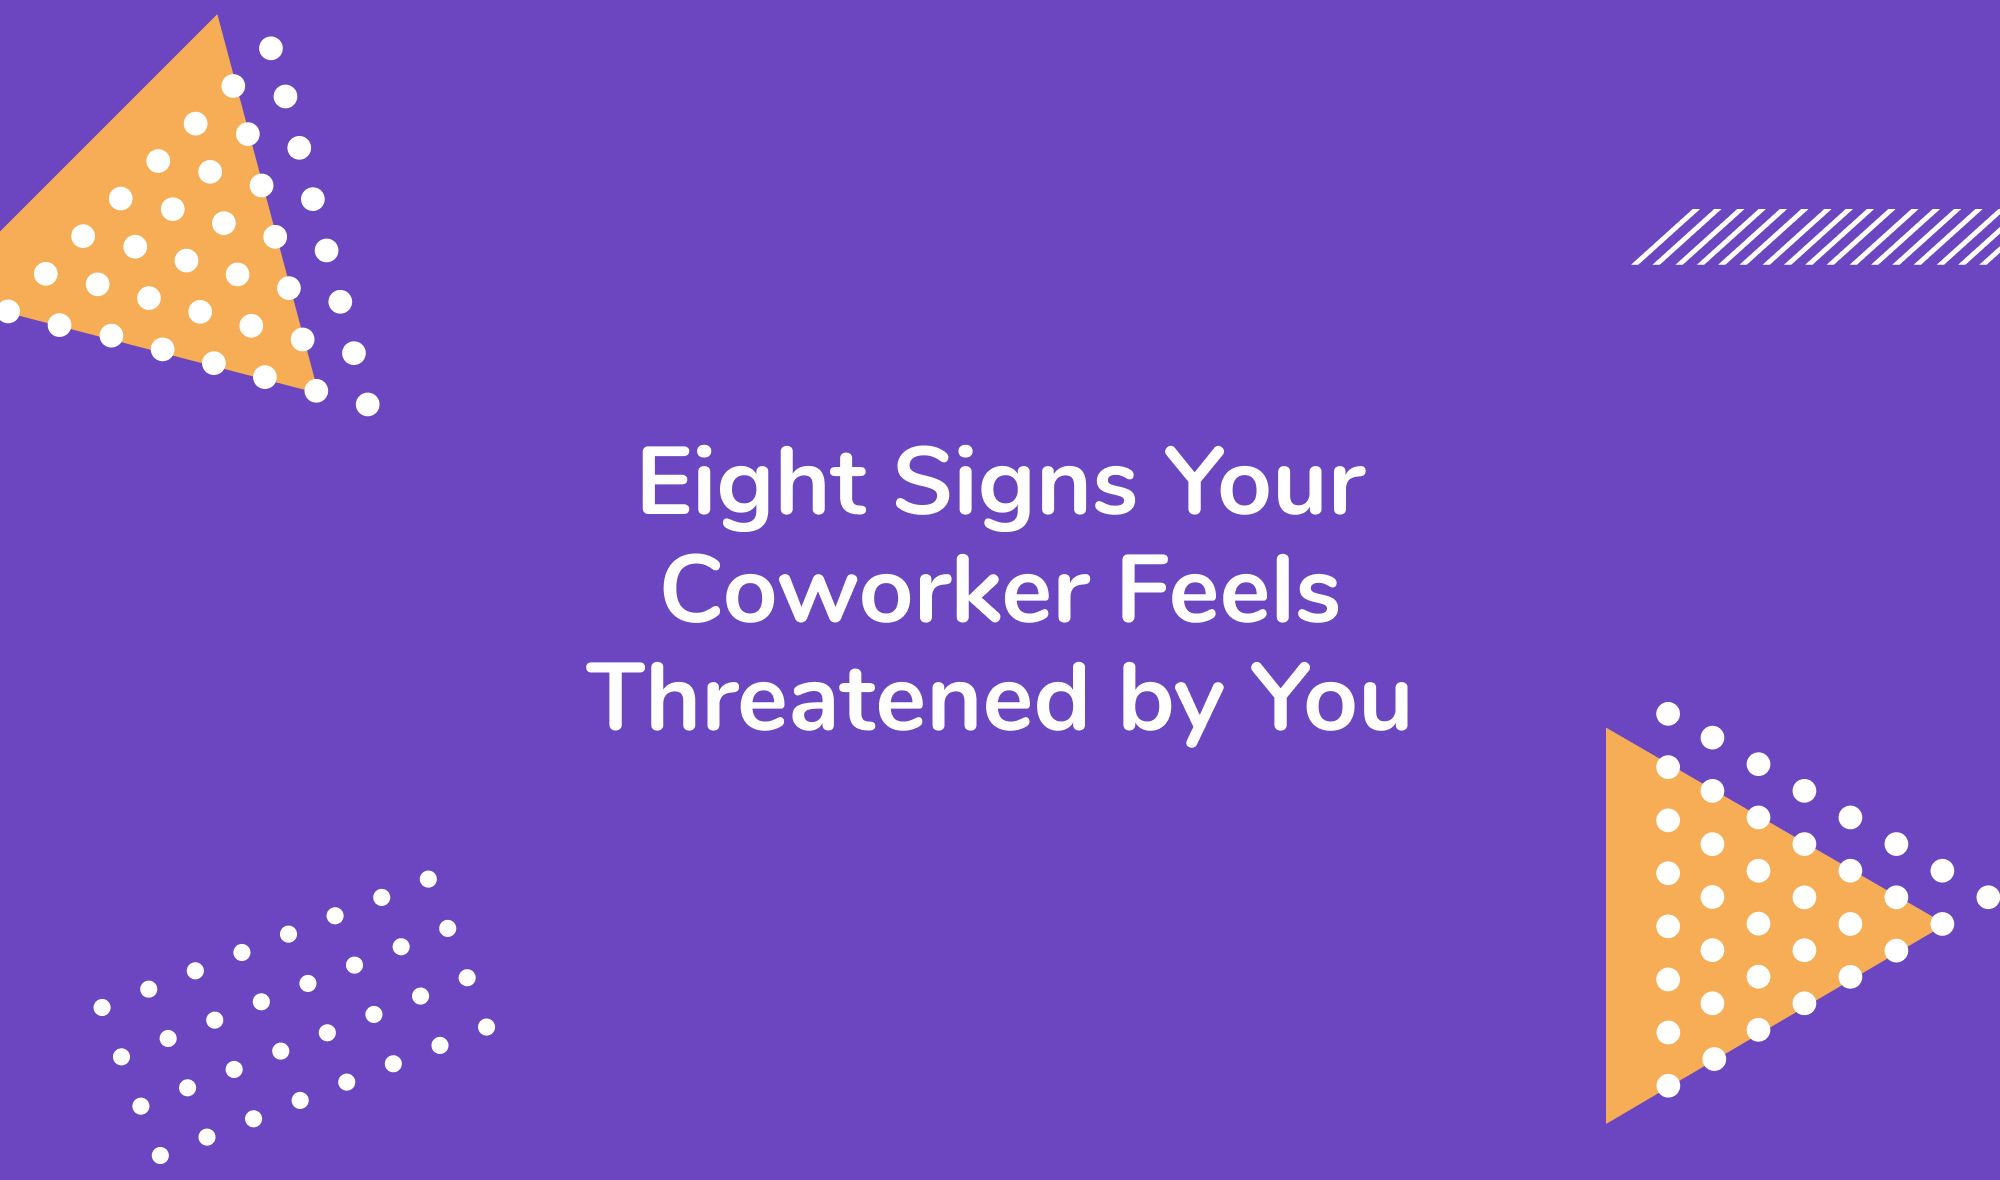 Eight Signs Your Coworker Feels Threatened by You